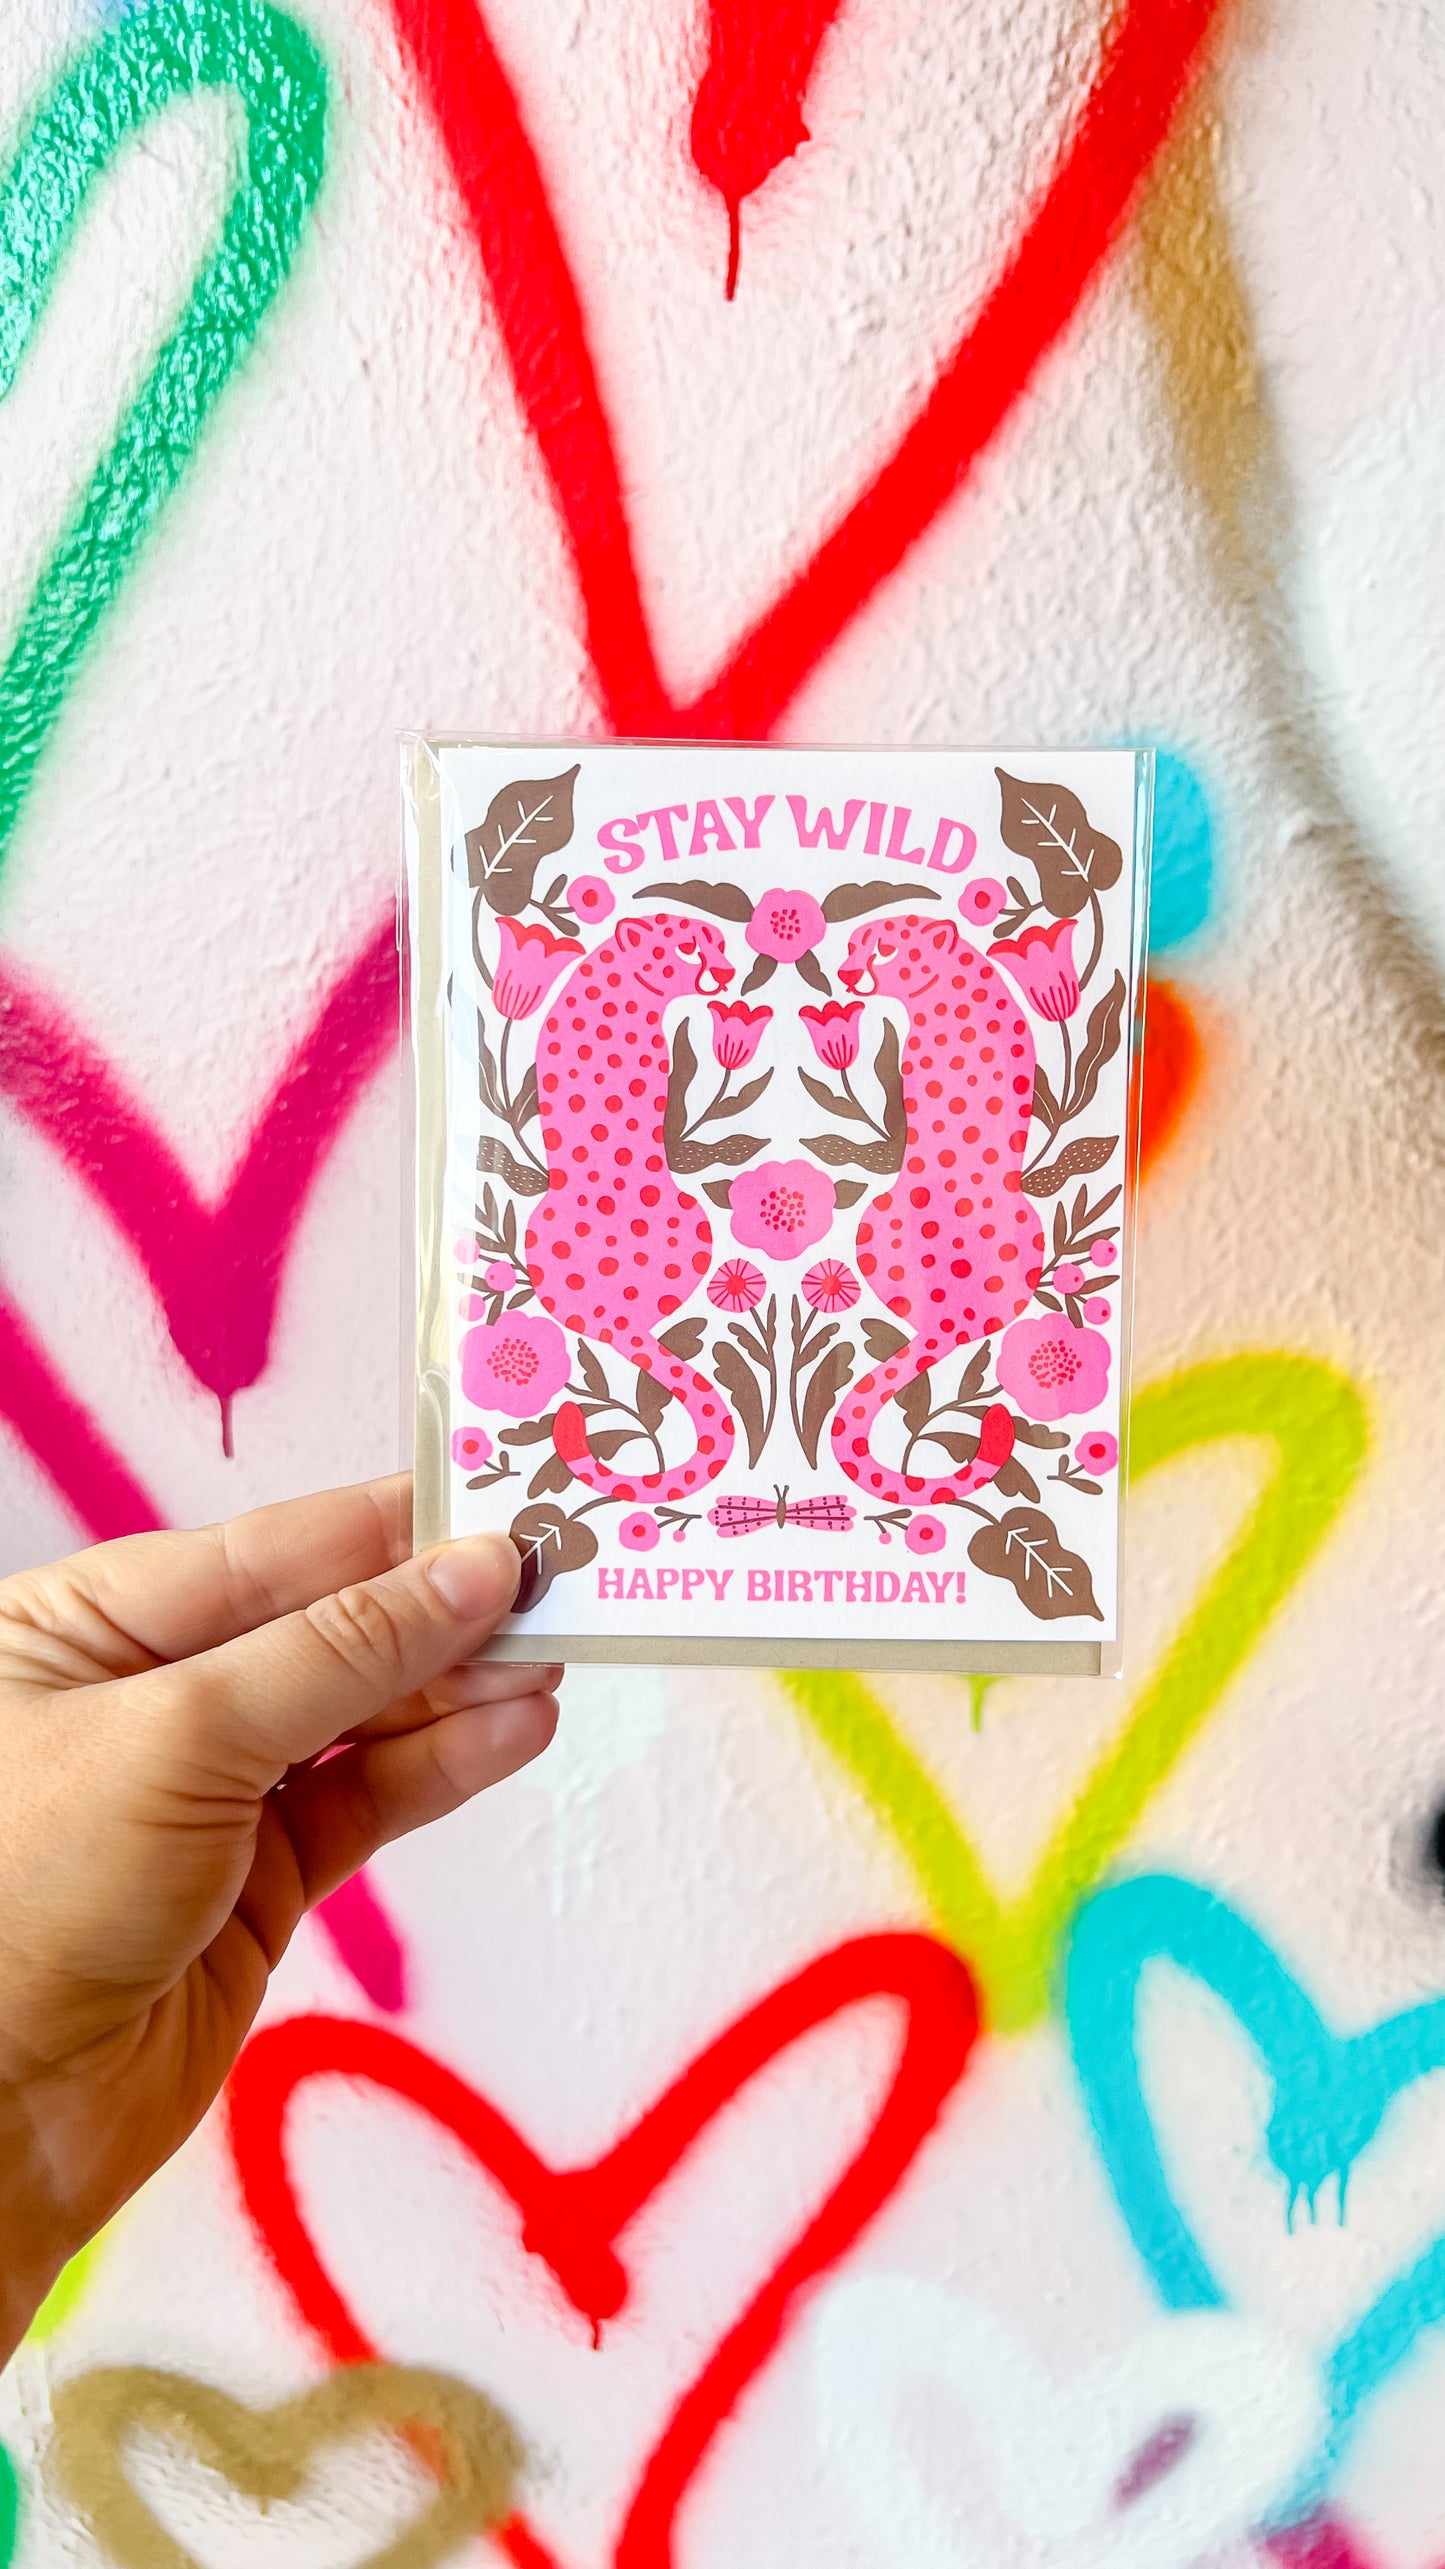 STAY WILD GREETING CARD